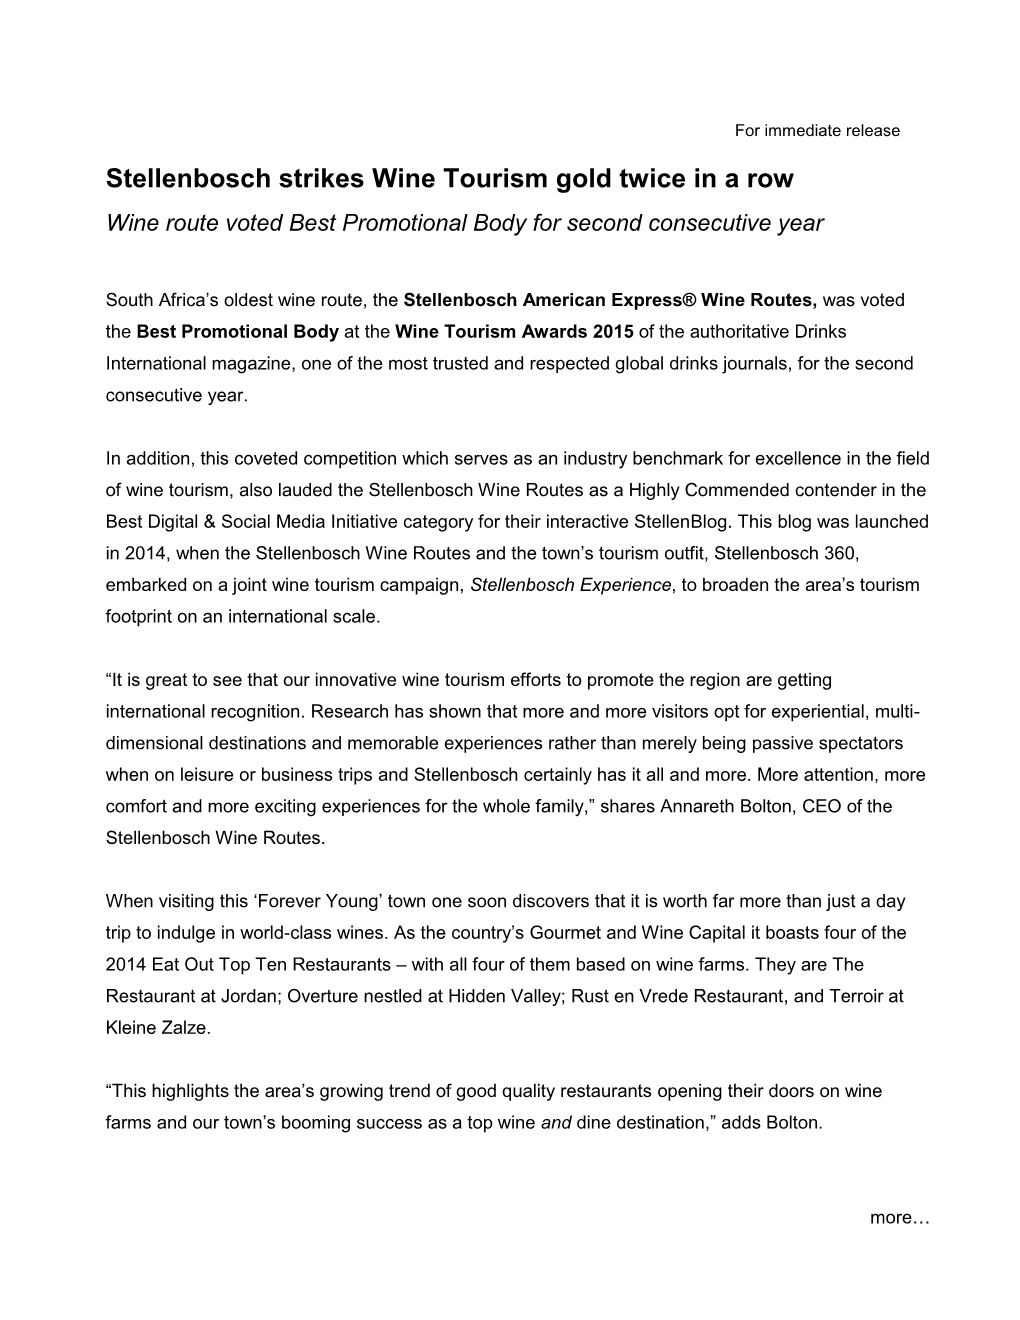 Stellenbosch Strikes Wine Tourism Gold Twice in a Row Wine Route Voted Best Promotional Body for Second Consecutive Year